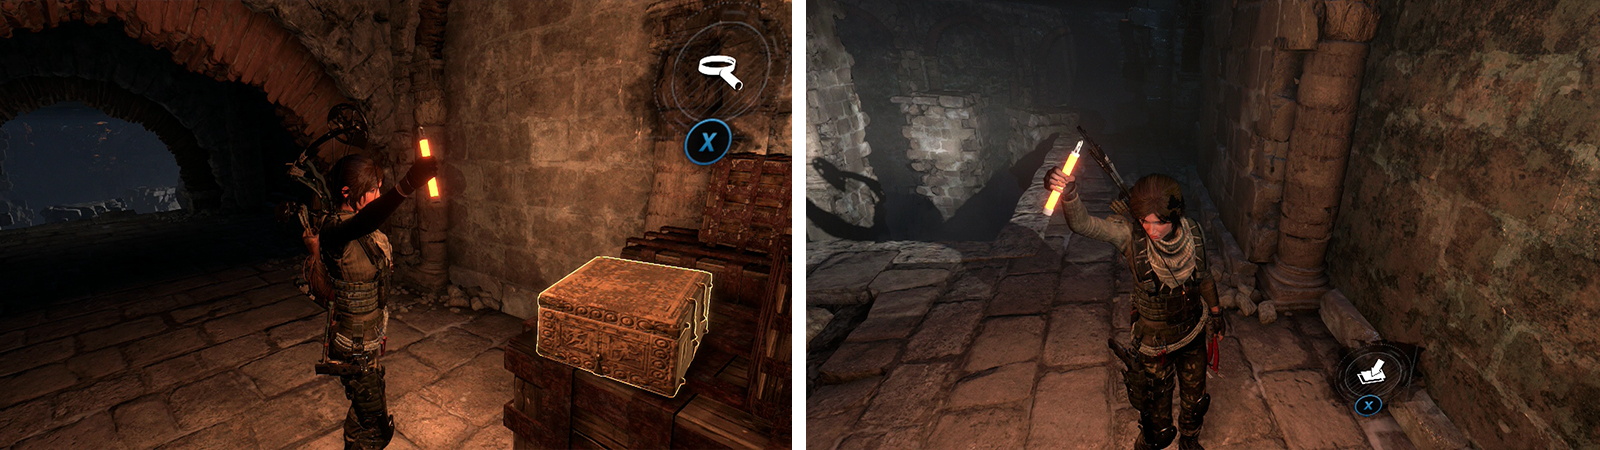 After climbin the ice wall, look to the left in the next room for Relic 01 (left). Cross the spike pit and look in the corner for Coin Cache 02 (right).